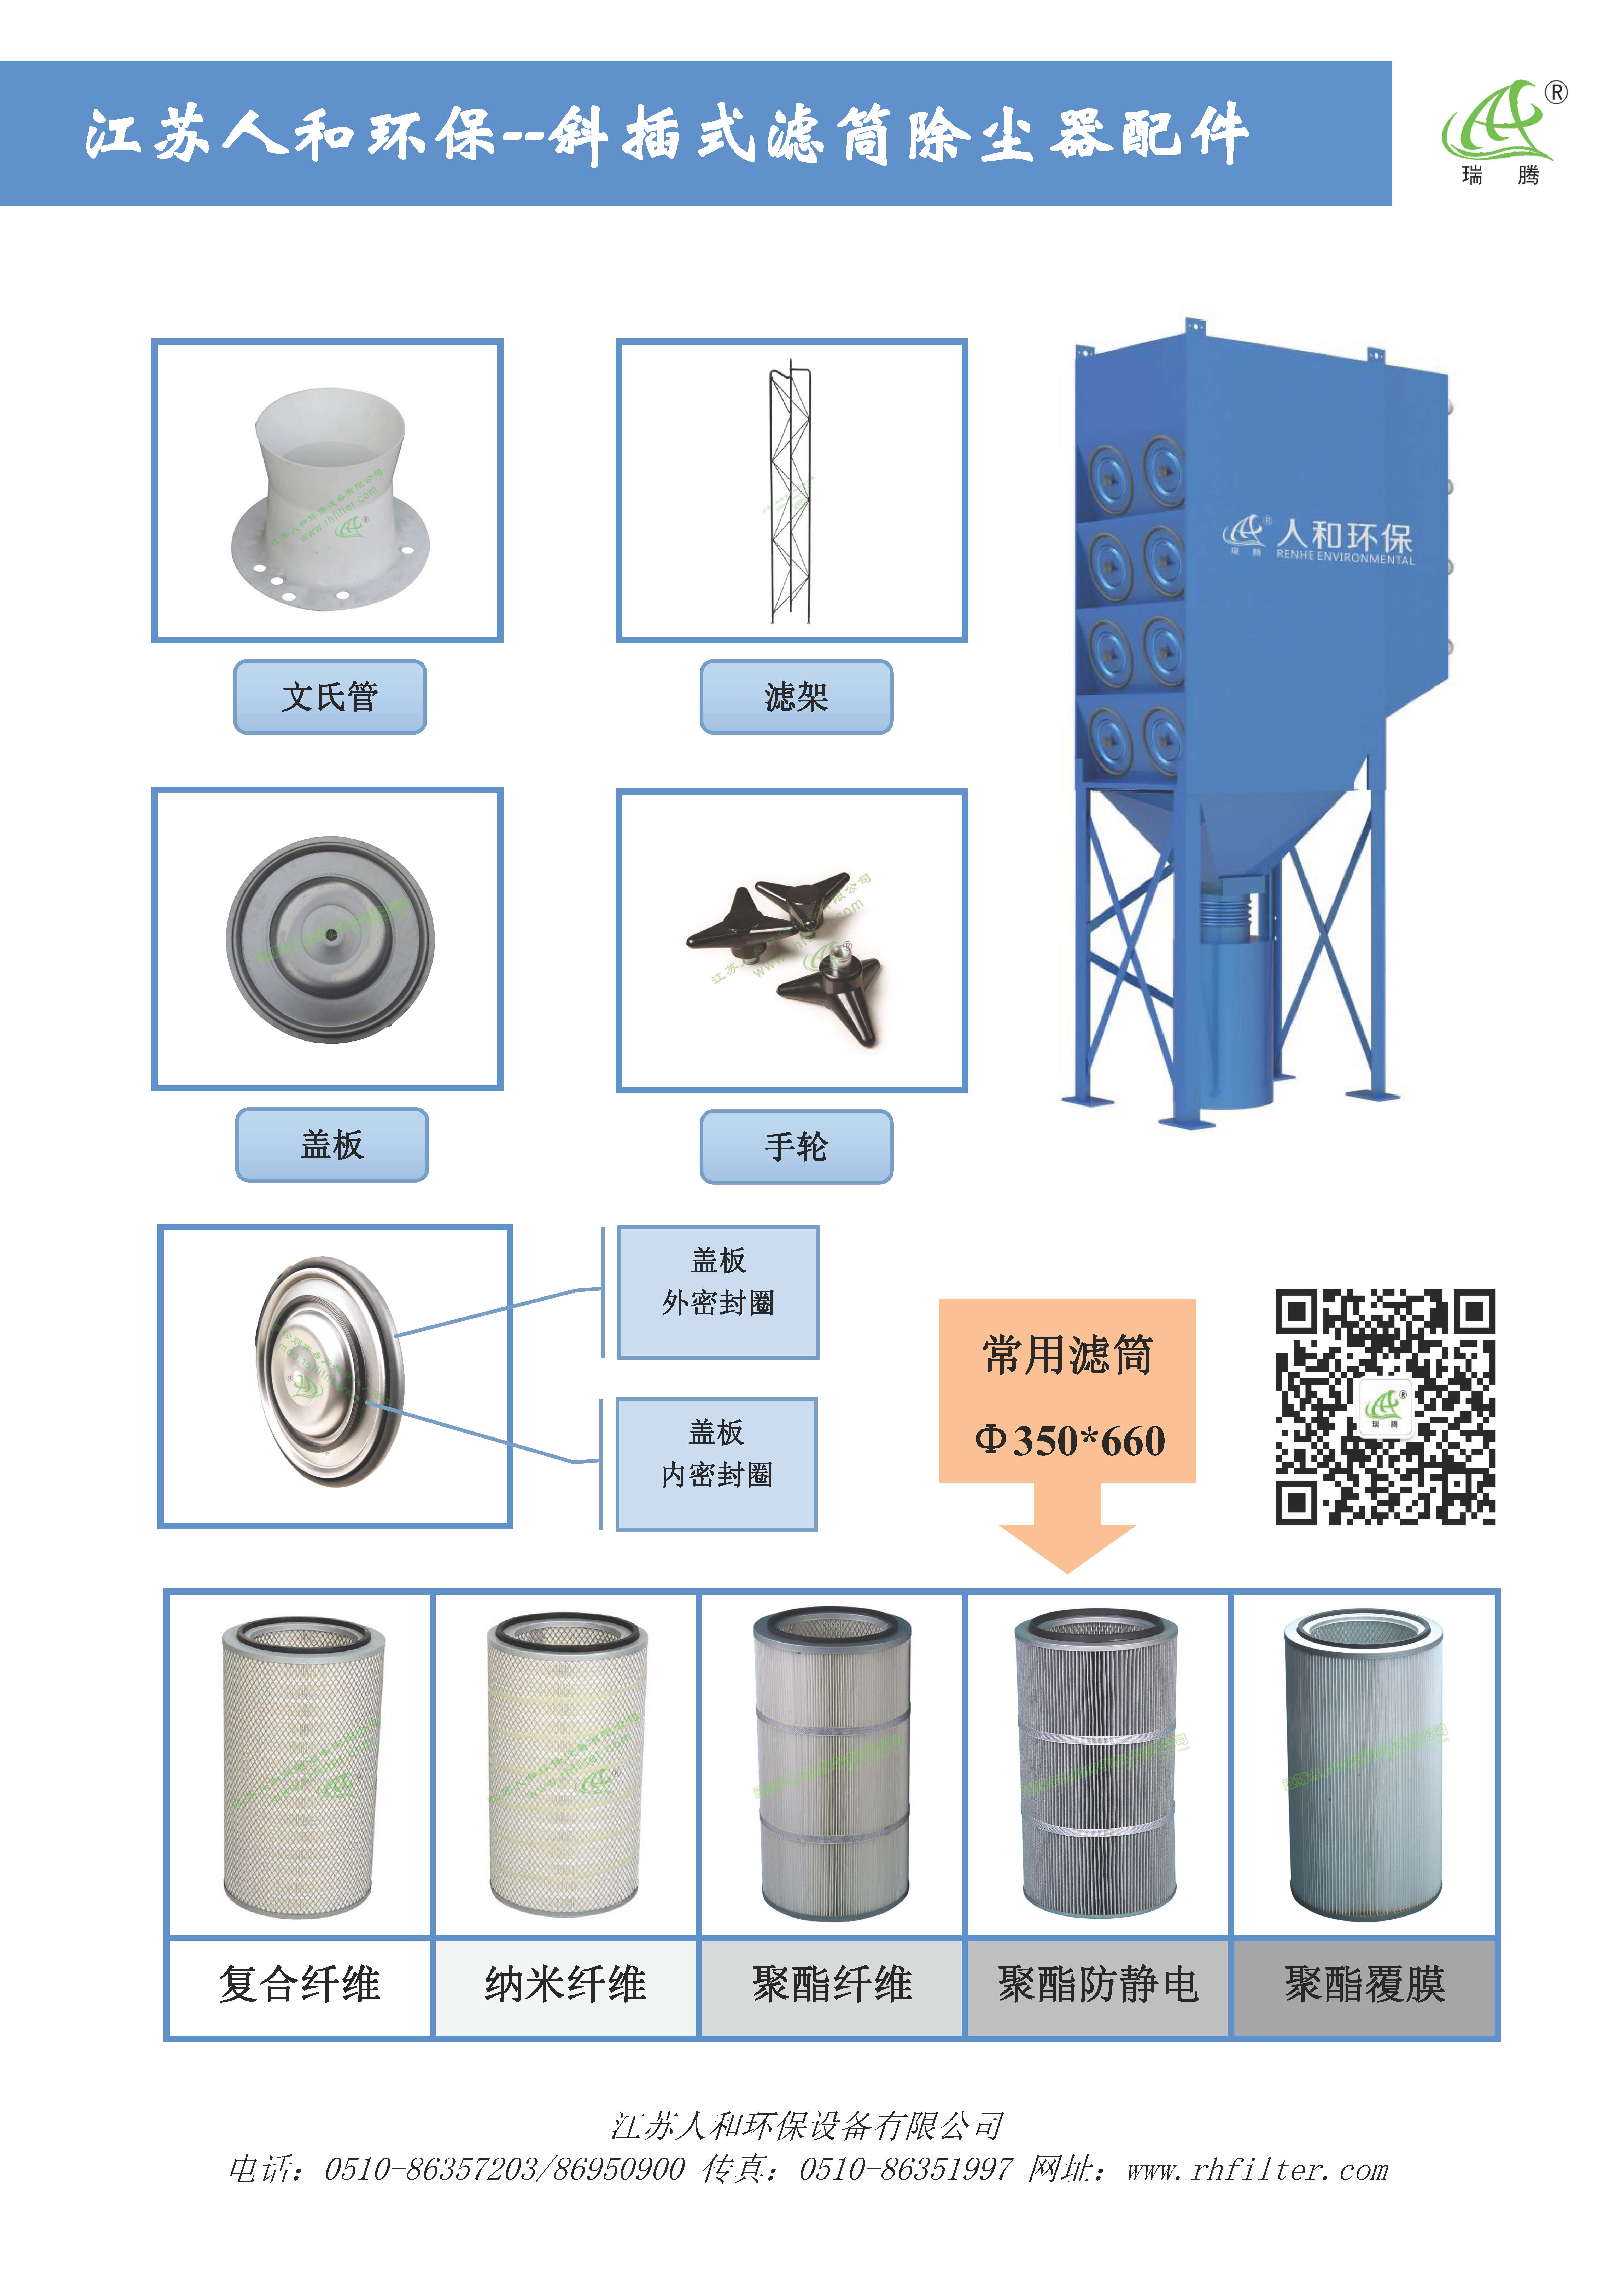 Downflow dust collector spare parts